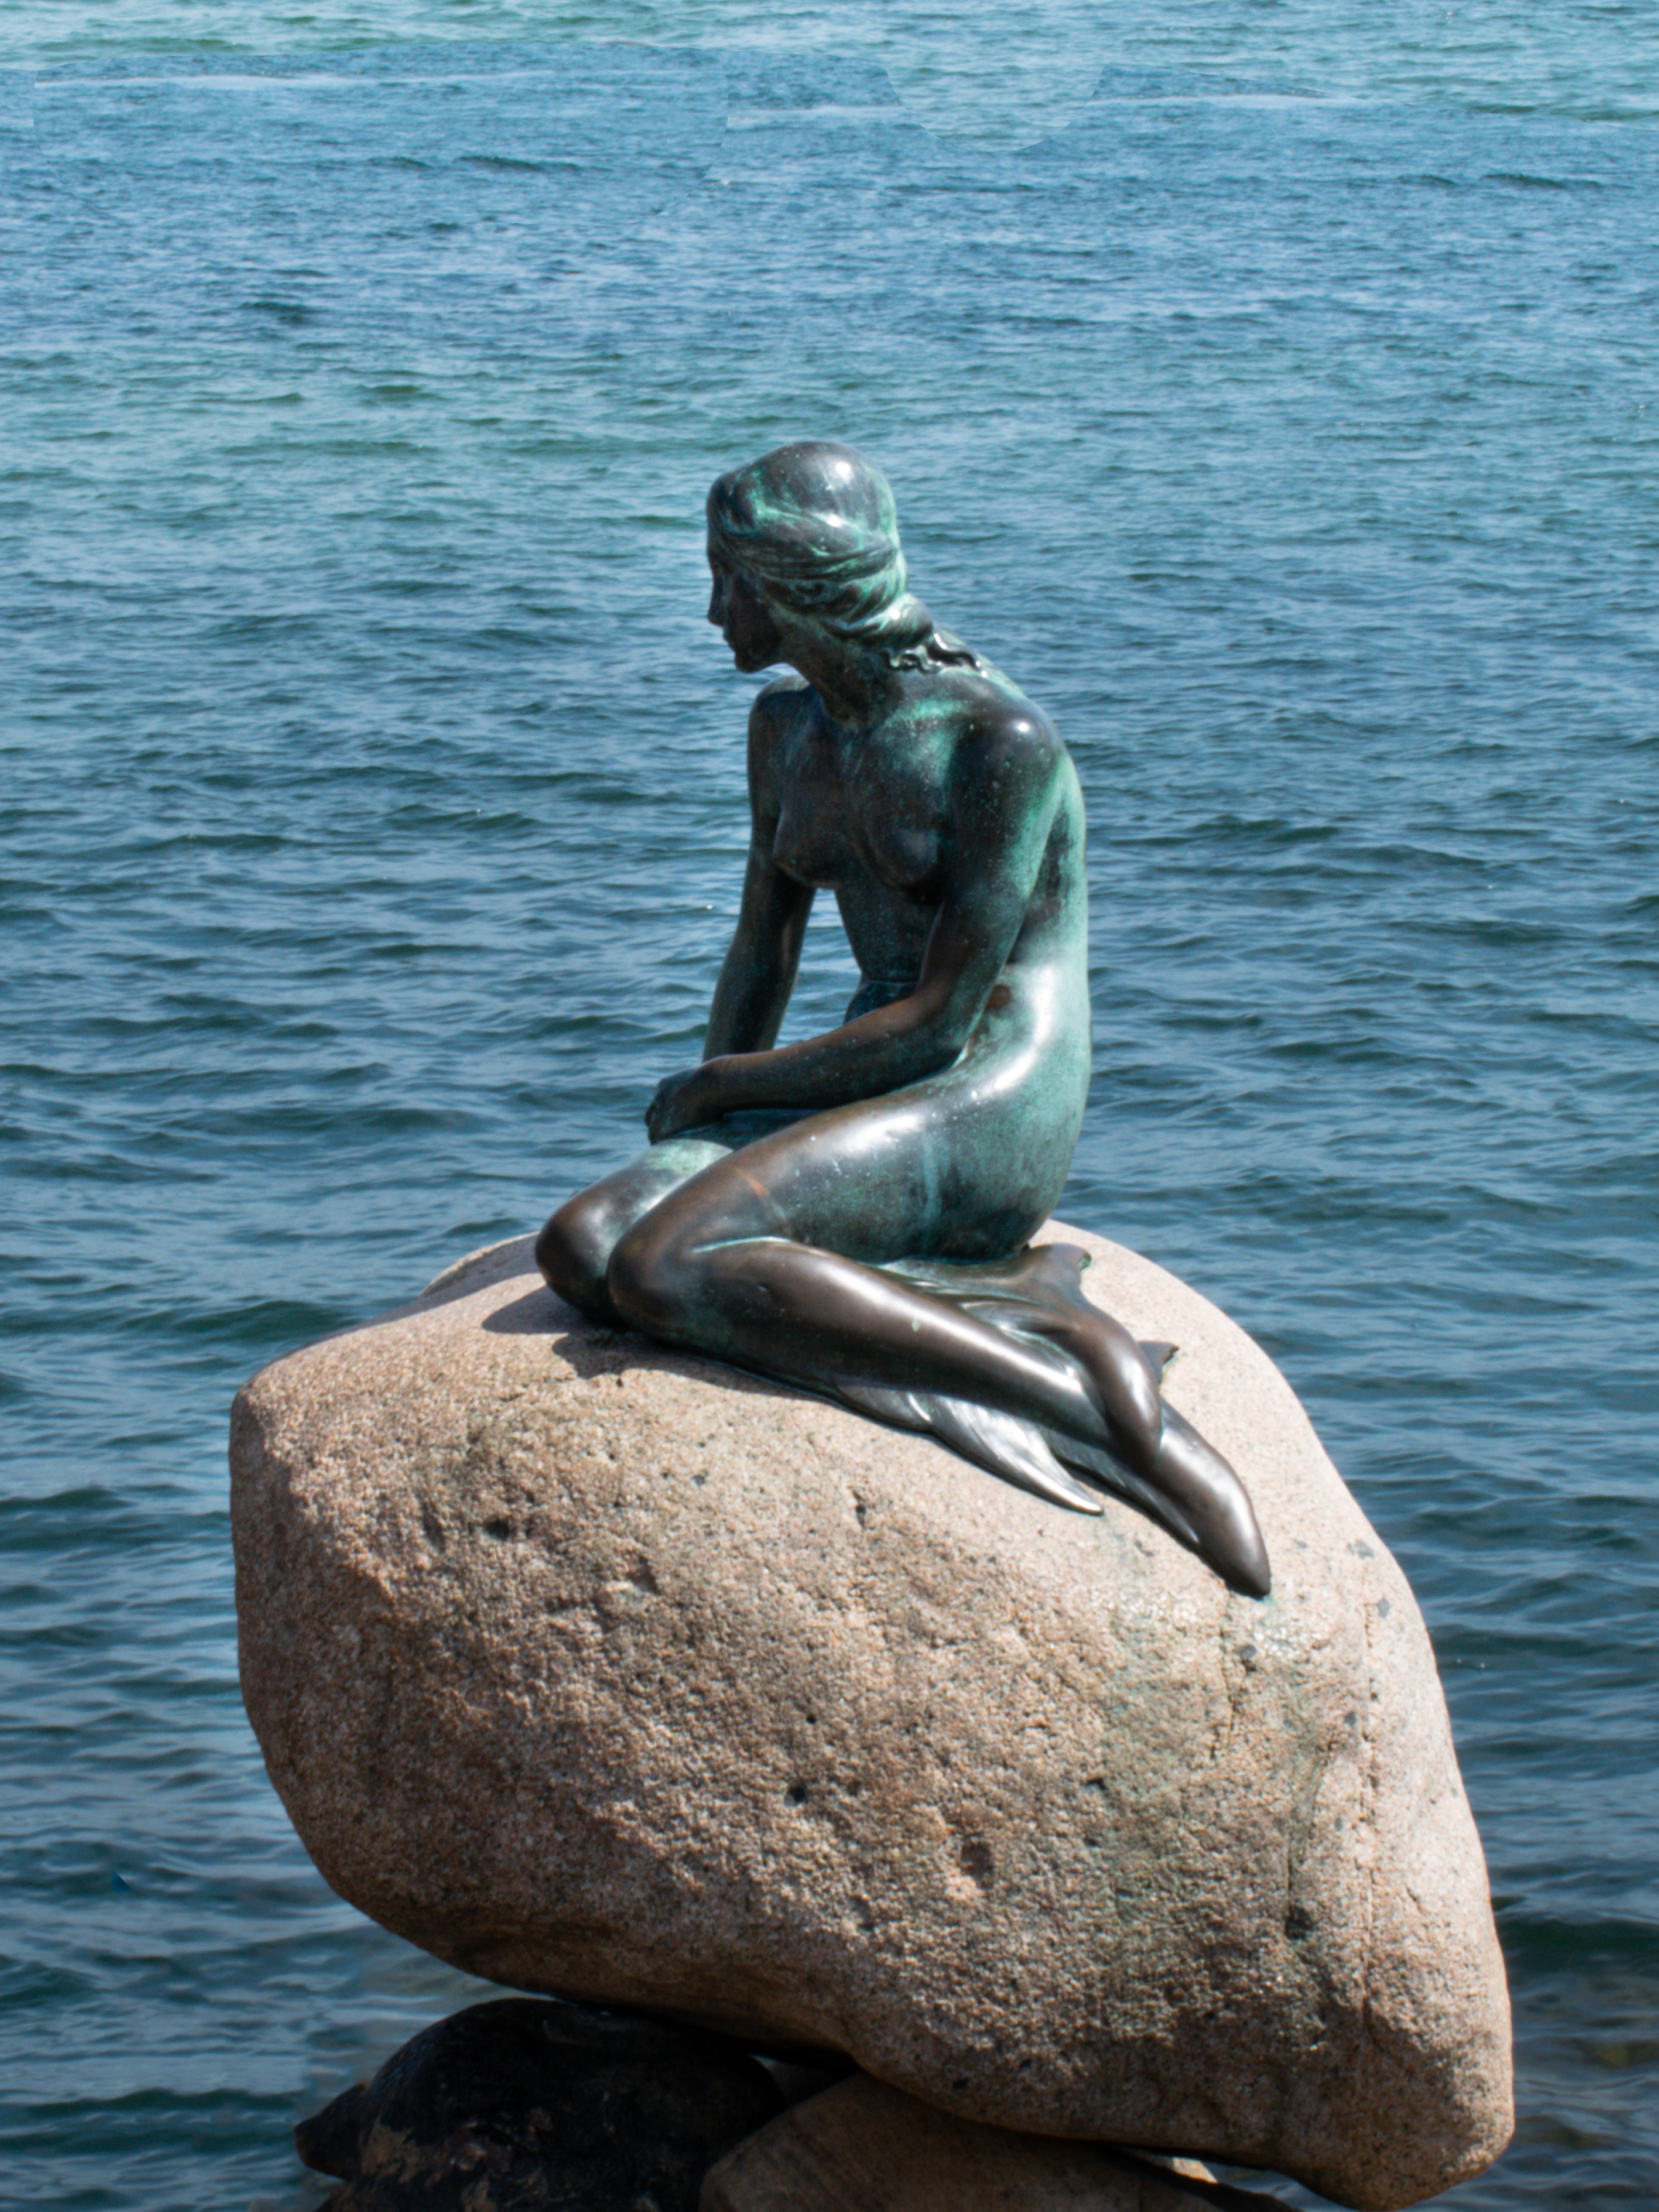 The iconic Little Mermaid statue at the harbor's waterfront in Copenhagen